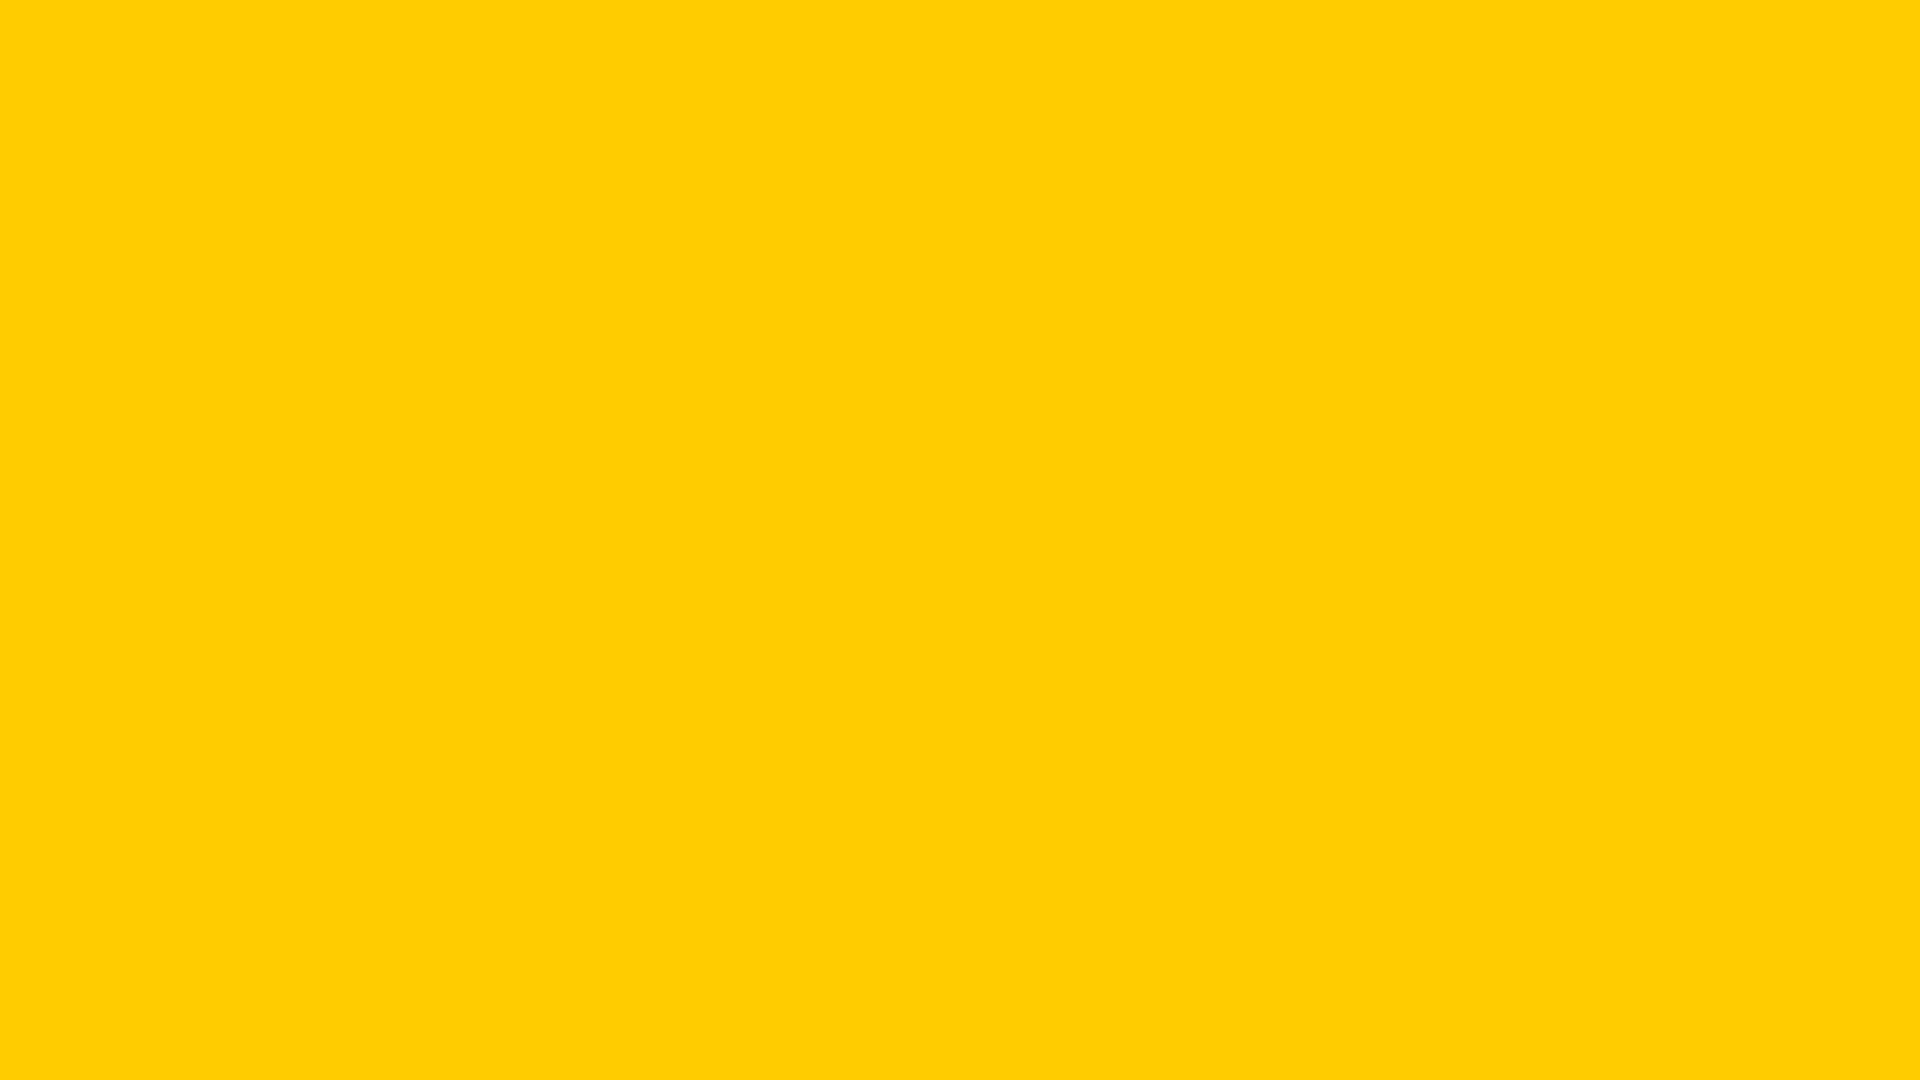 1920x1080-tangerine-yellow-solid-color-background.jpg